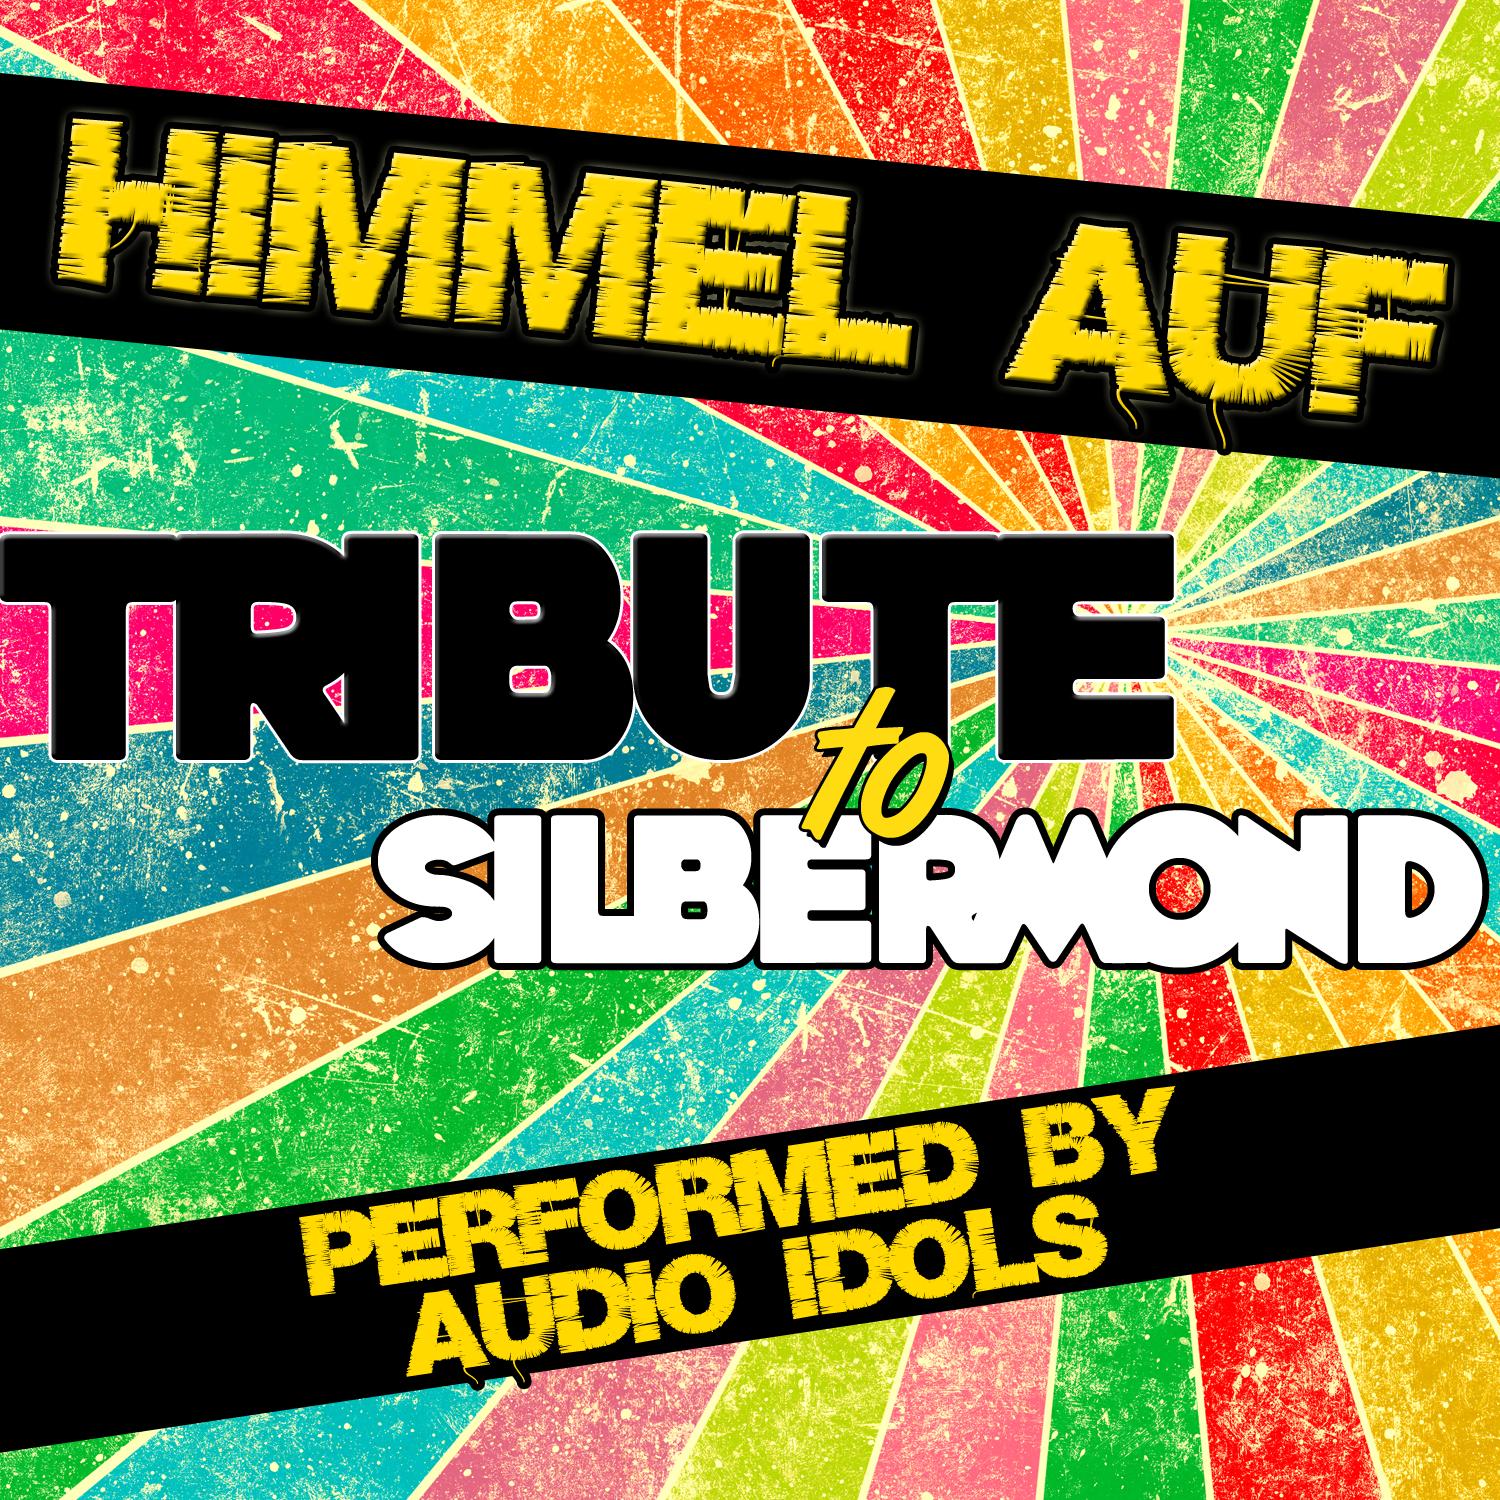 Himmel auf (A Tribute to Silbermond) - Single